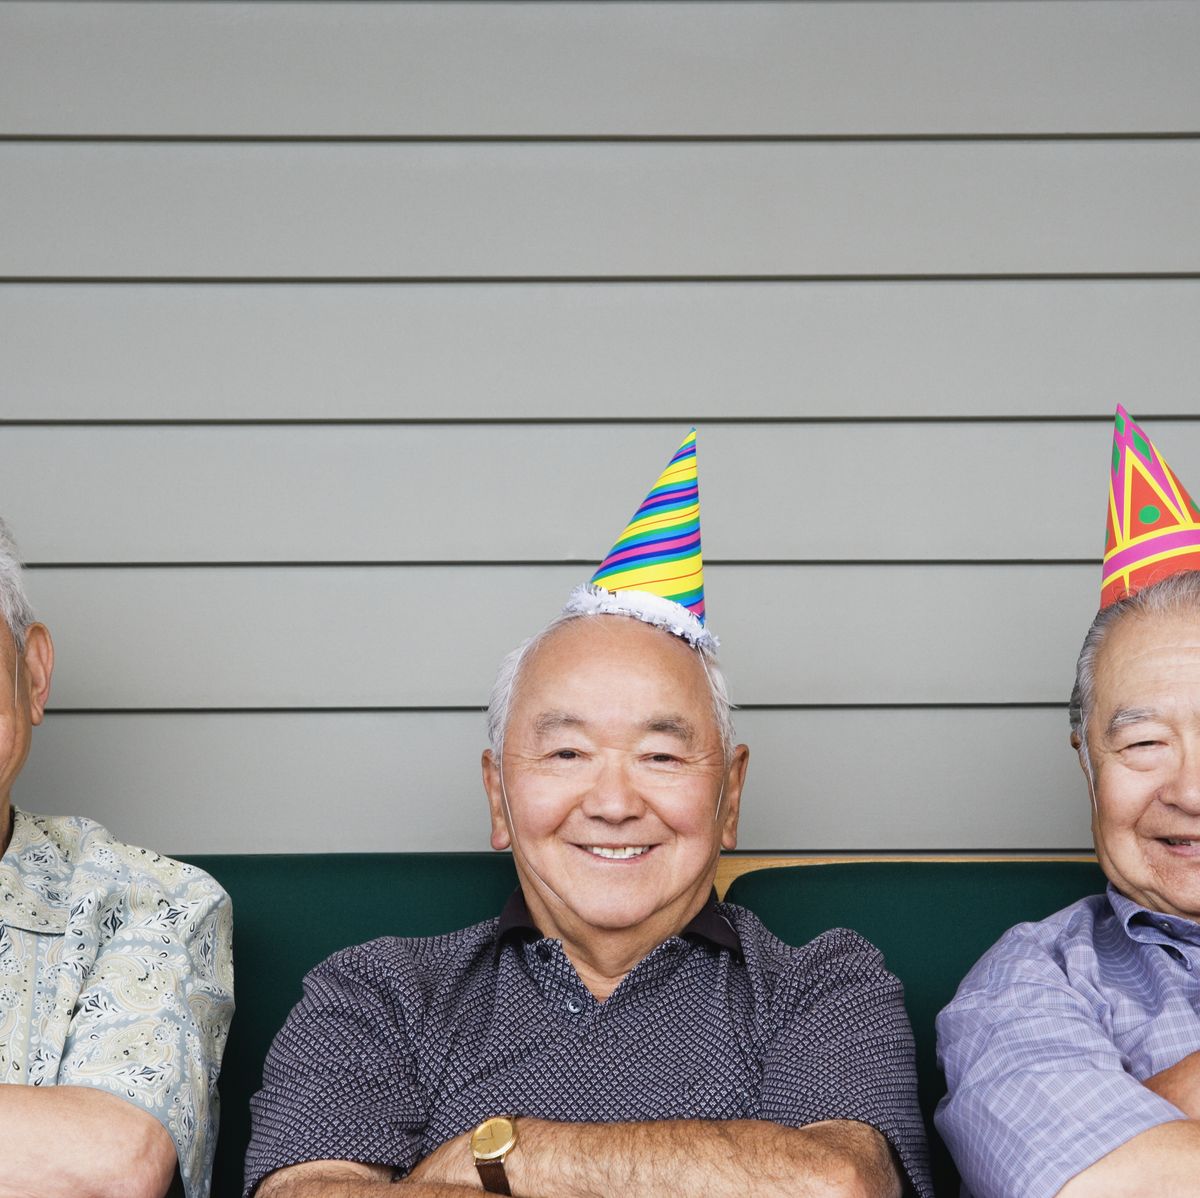 https://hips.hearstapps.com/hmg-prod/images/portrait-of-three-elderly-men-sitting-on-couch-royalty-free-image-1696368425.jpg?crop=0.668xw:1.00xh;0.316xw,0&resize=1200:*